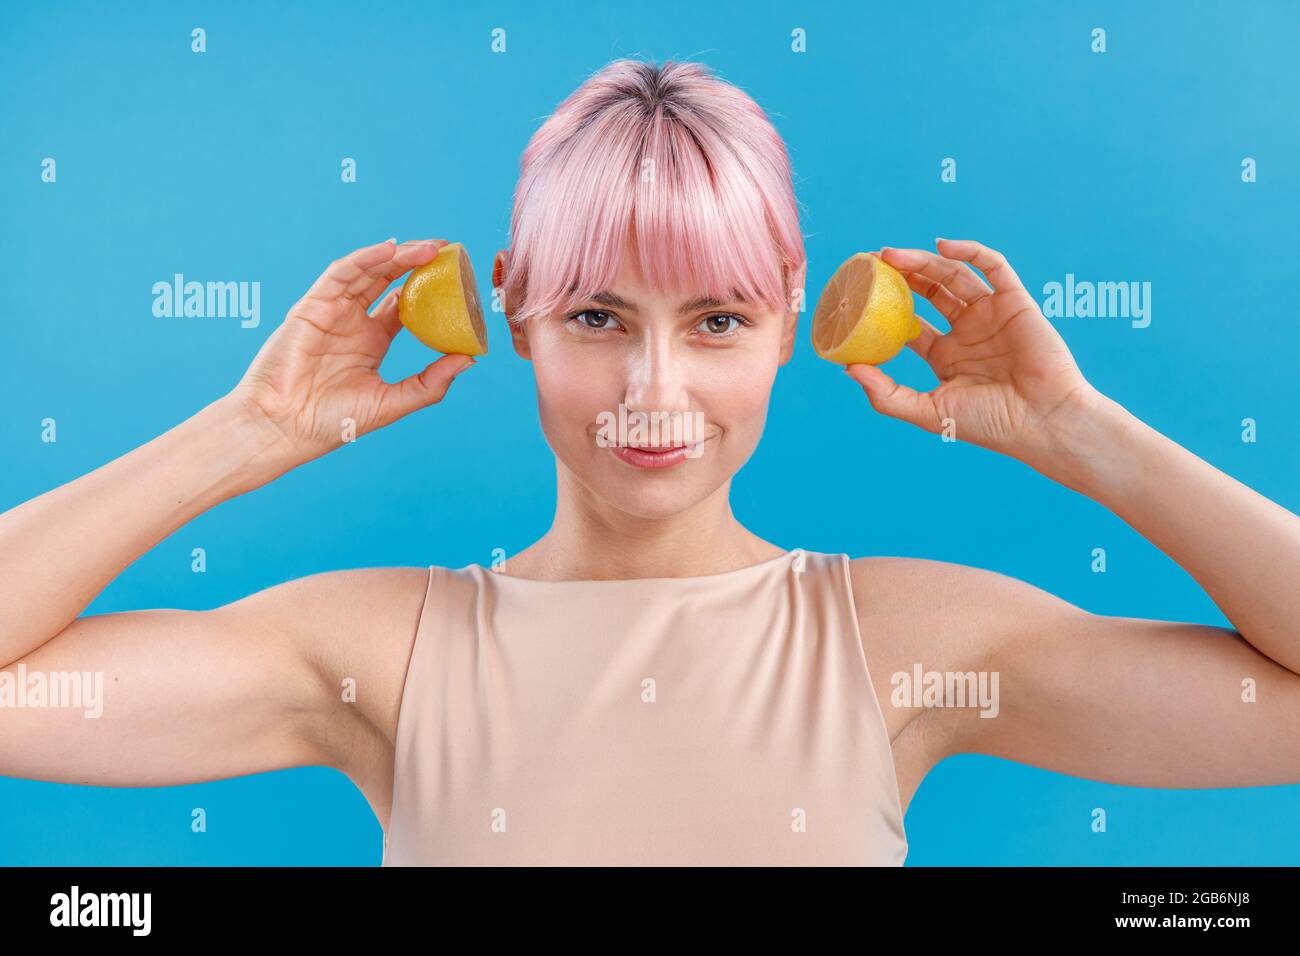 Portrait of young woman with pink hair smiling and holding halves of fresh lemon near her ears, posing isolated over blue background Stock Photo